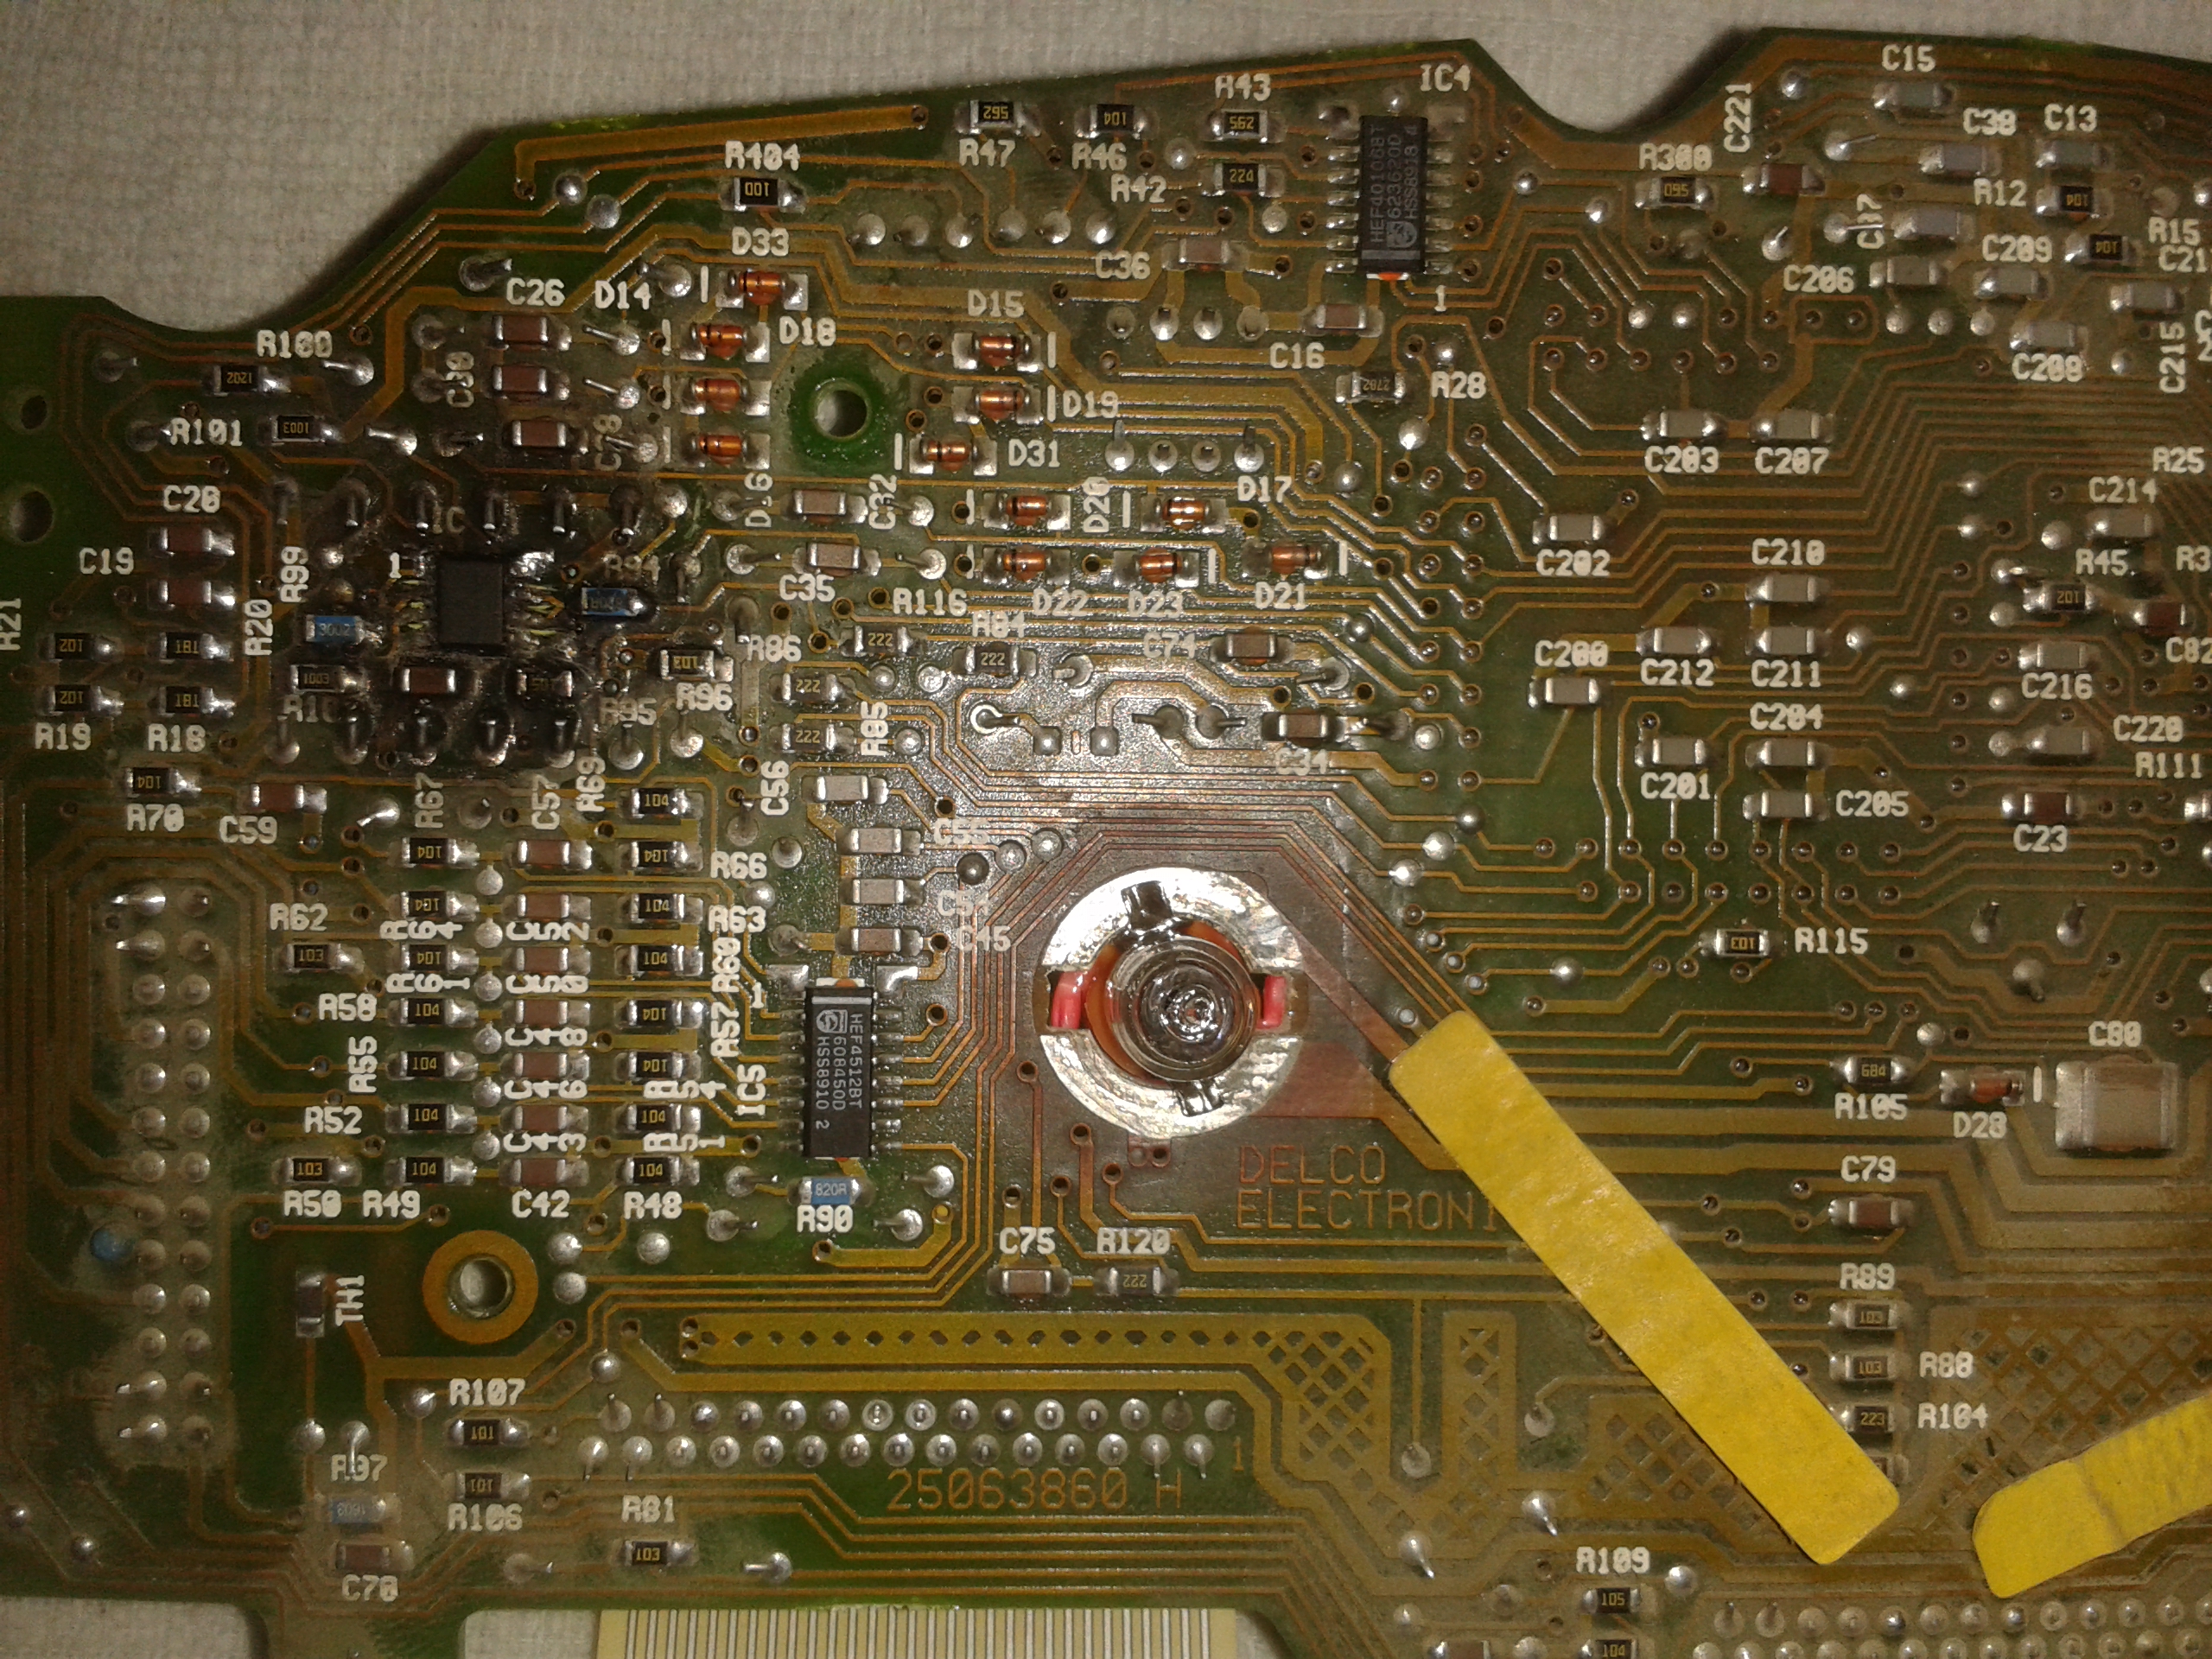 a close up of the soic in question